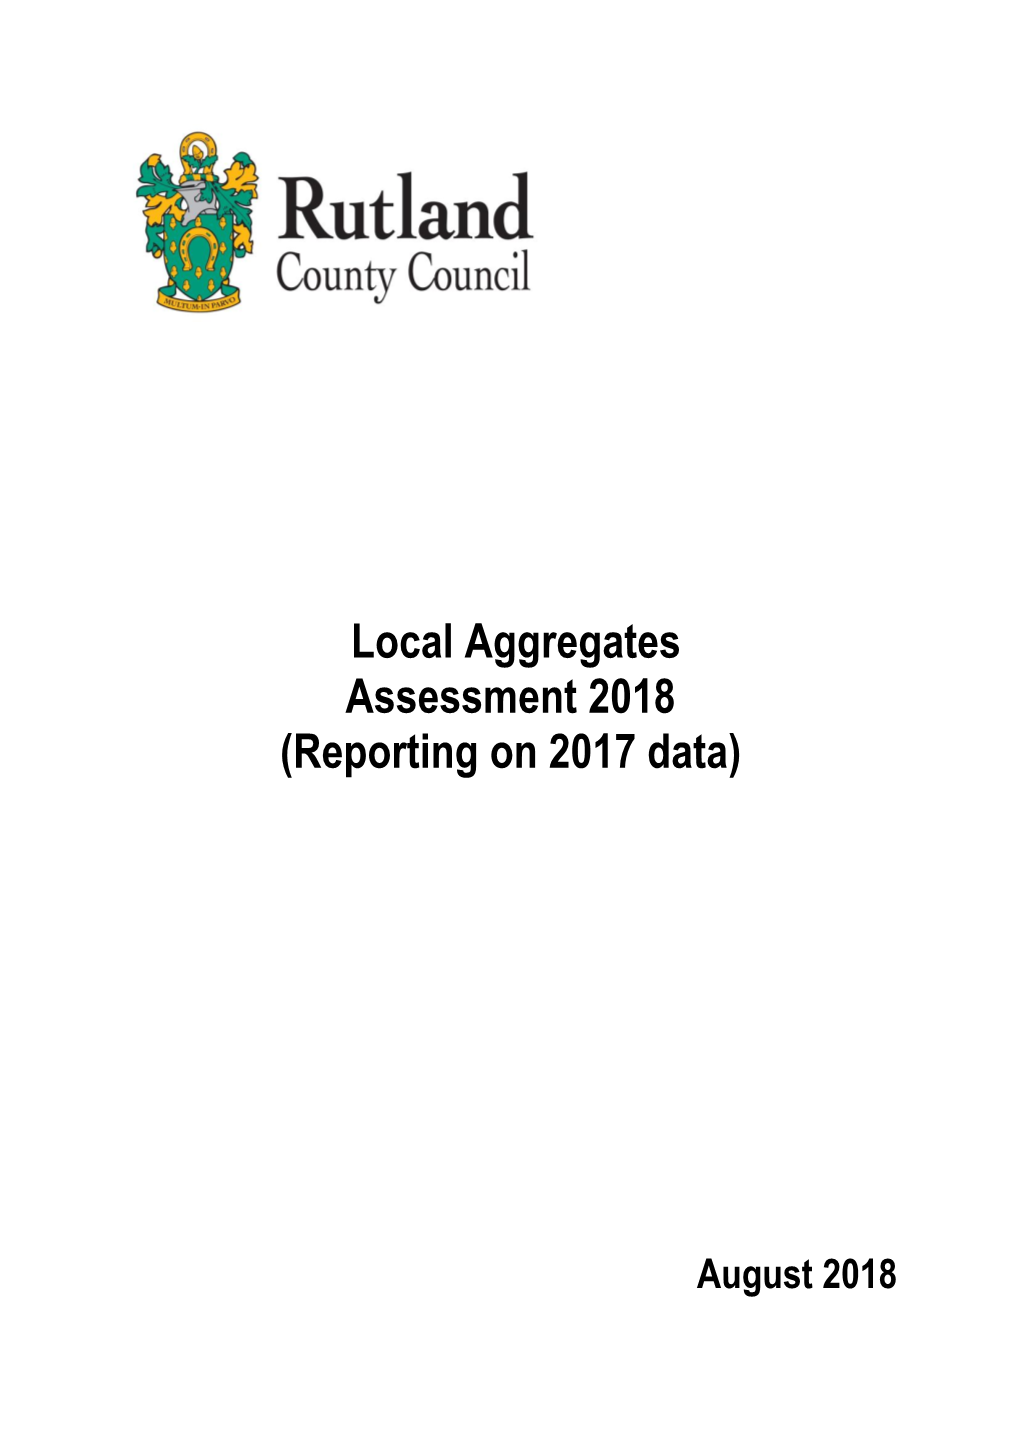 Local Aggregates Assessment 2018 (Reporting on 2017 Data)